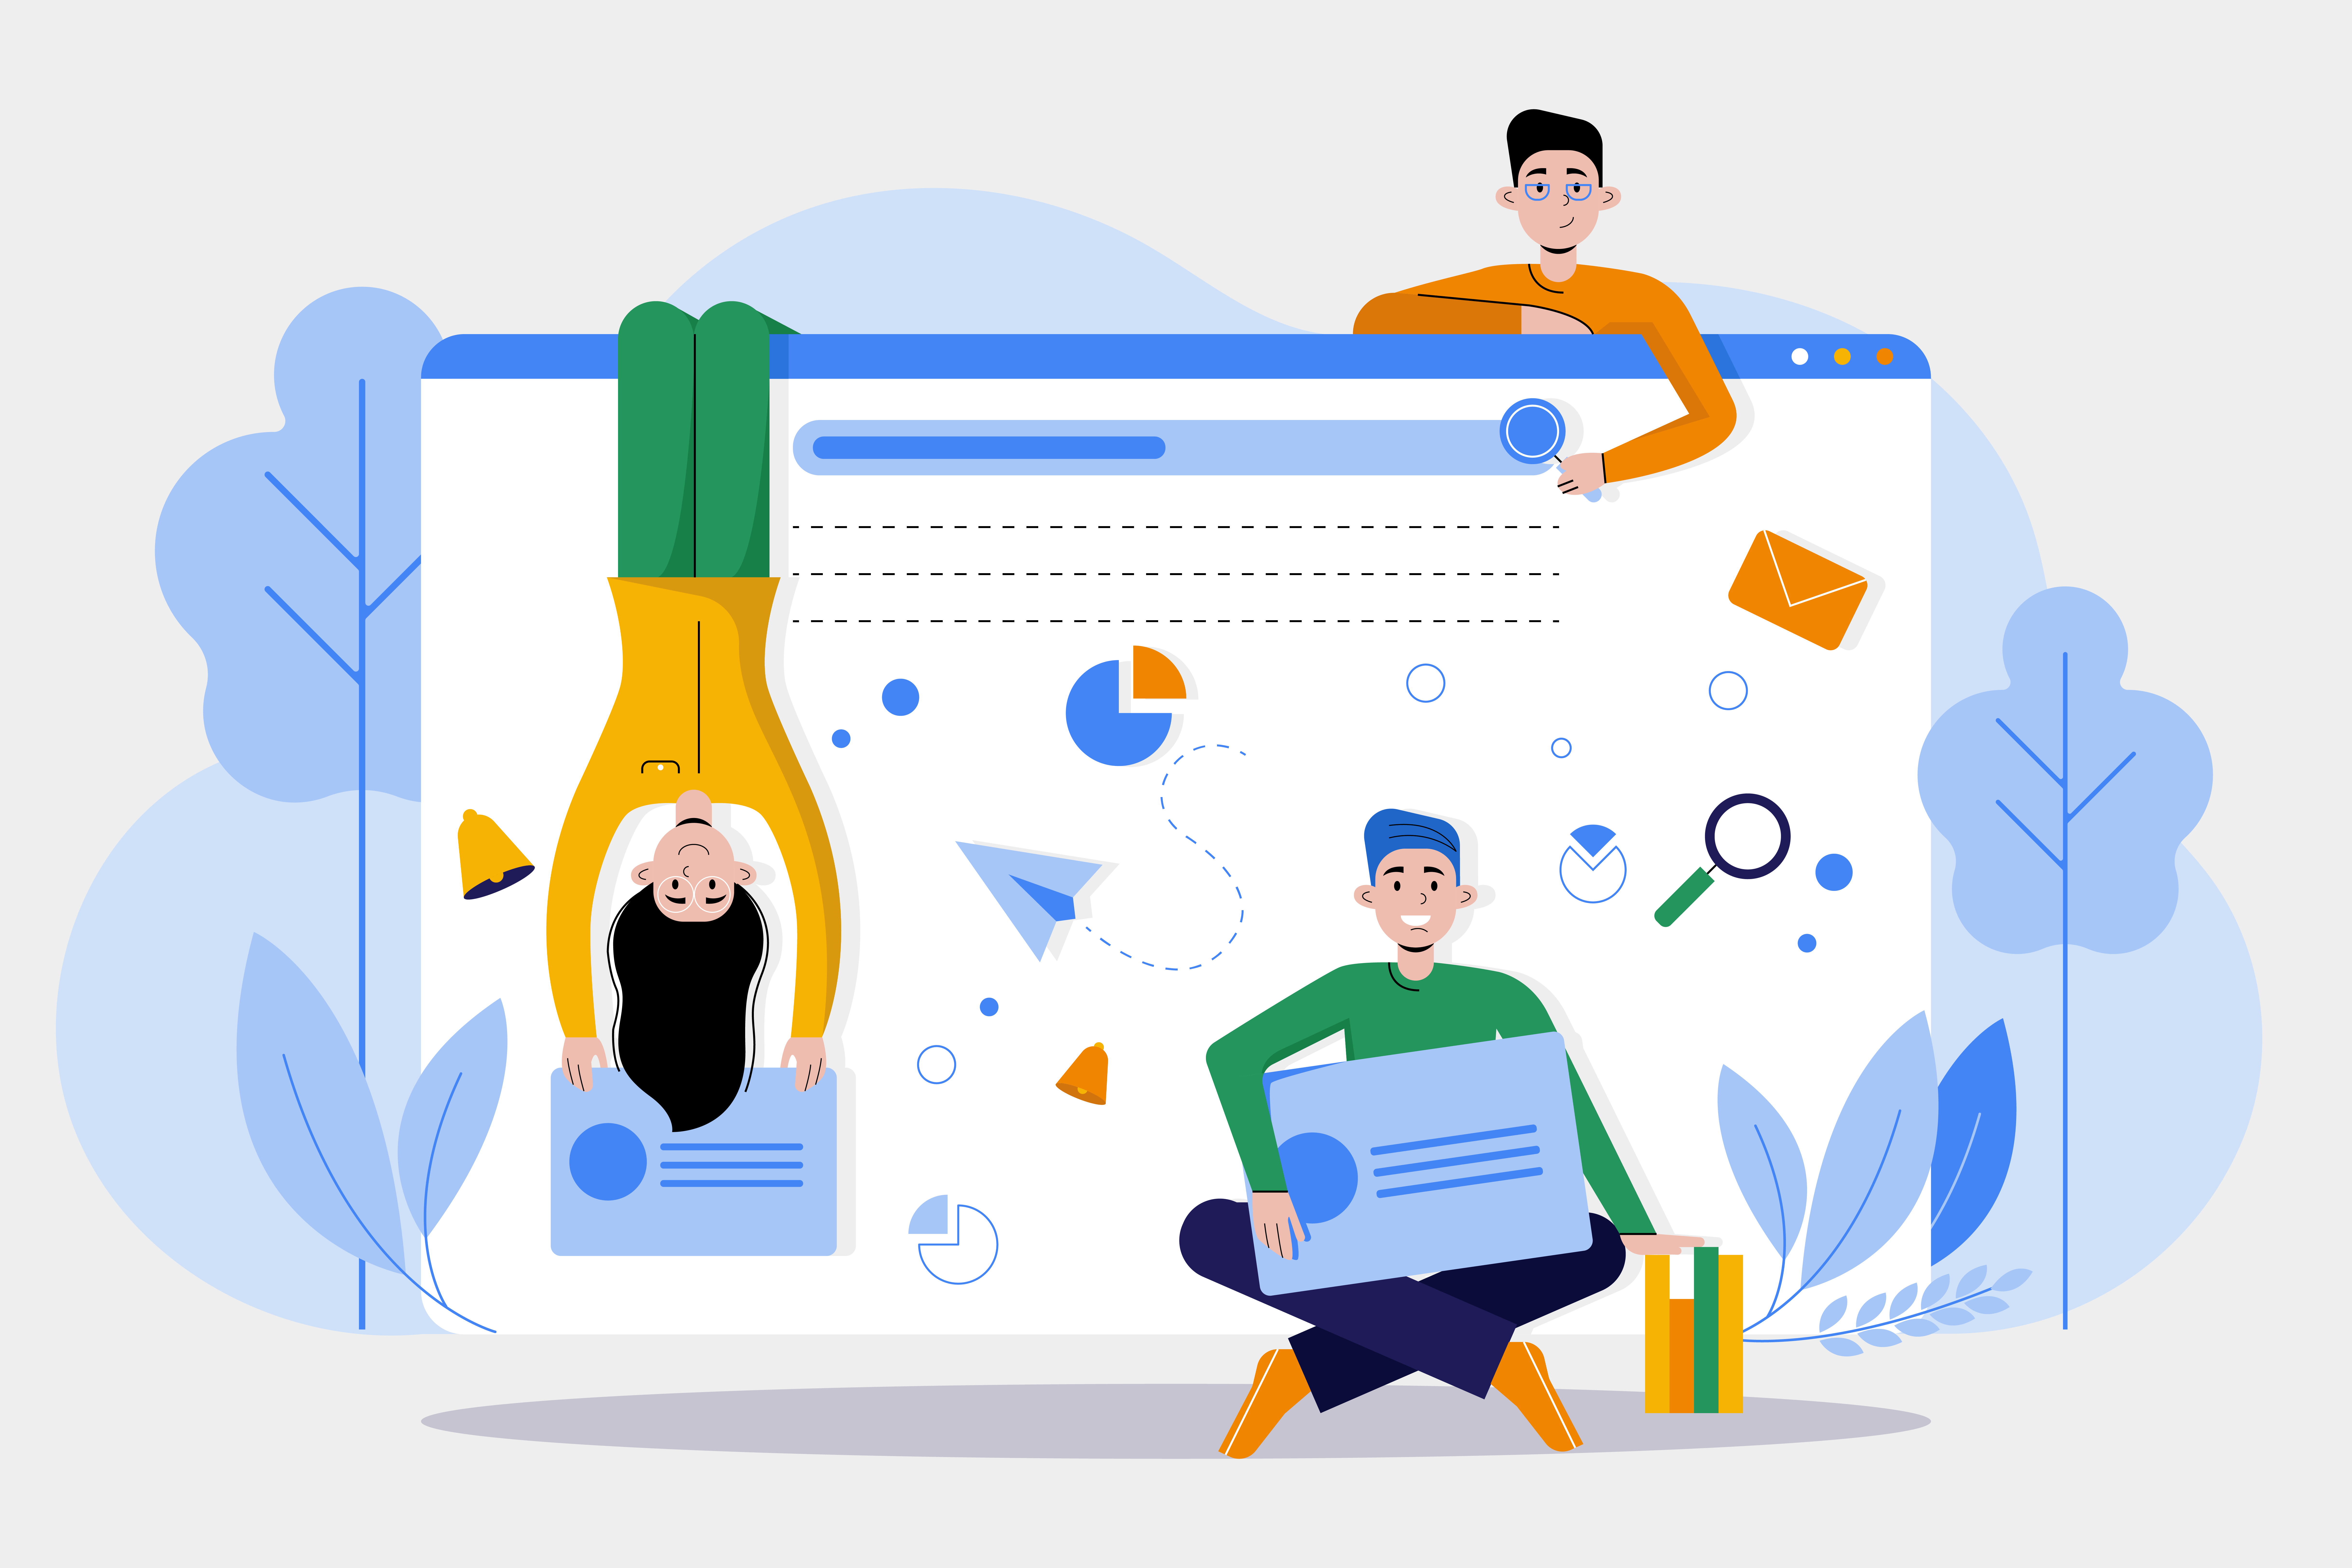 Illustration of 3 people sitting around a web page?